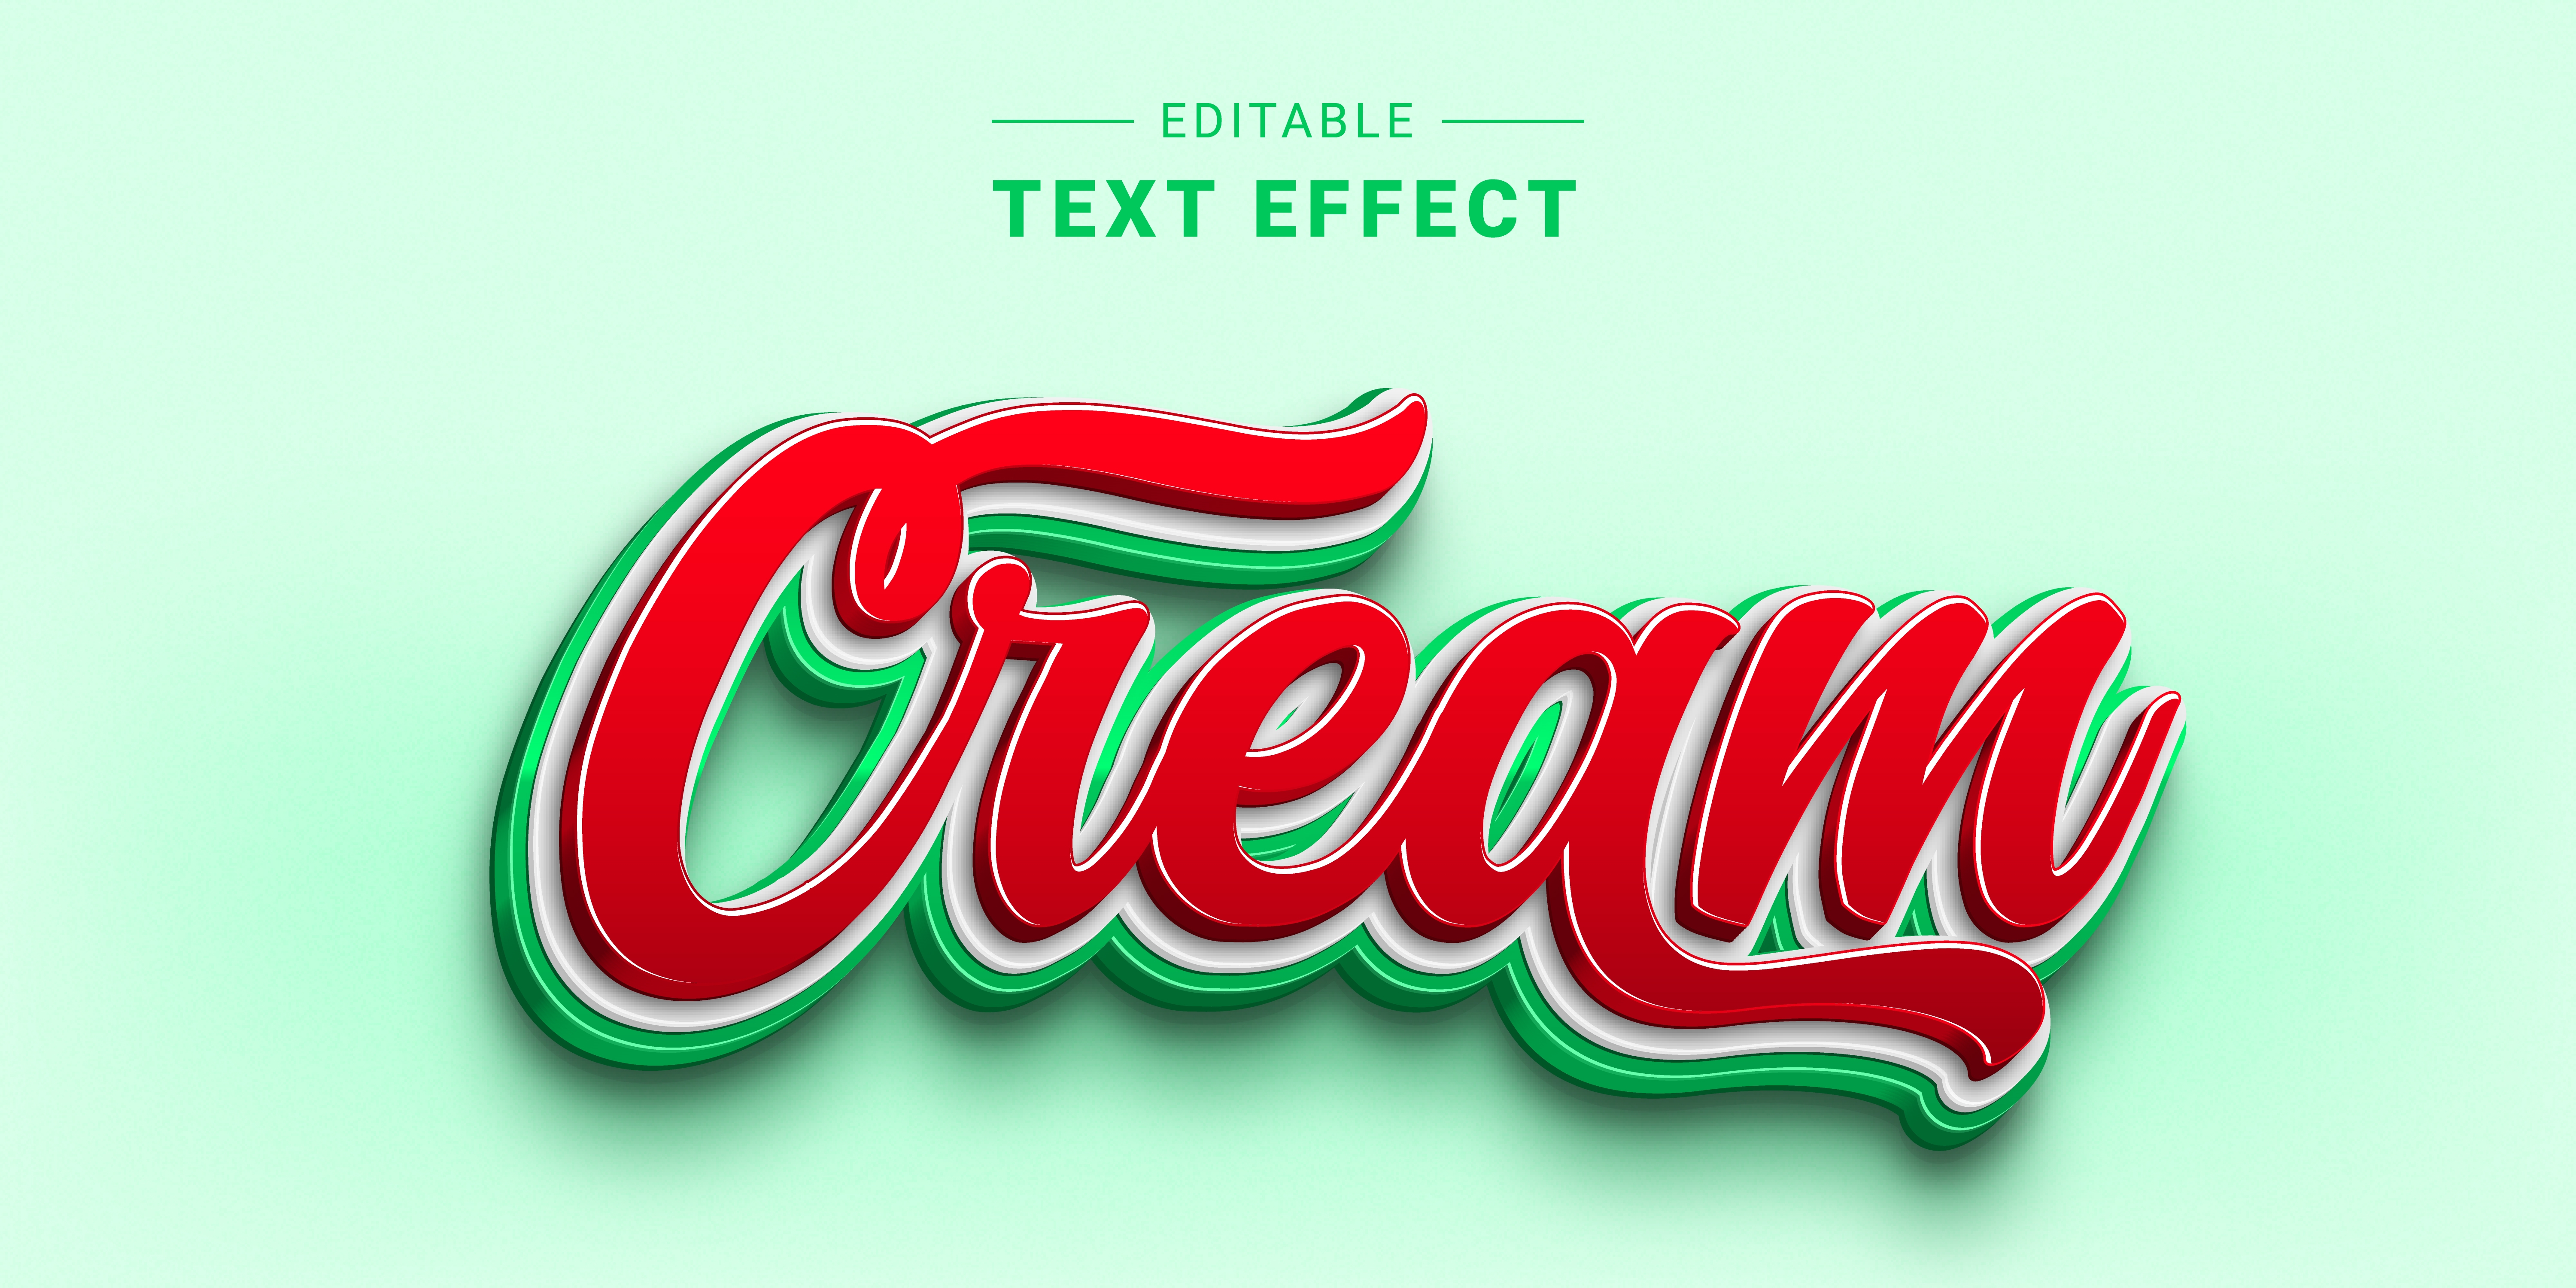 3D Editable Shiny Lettering Text Effect